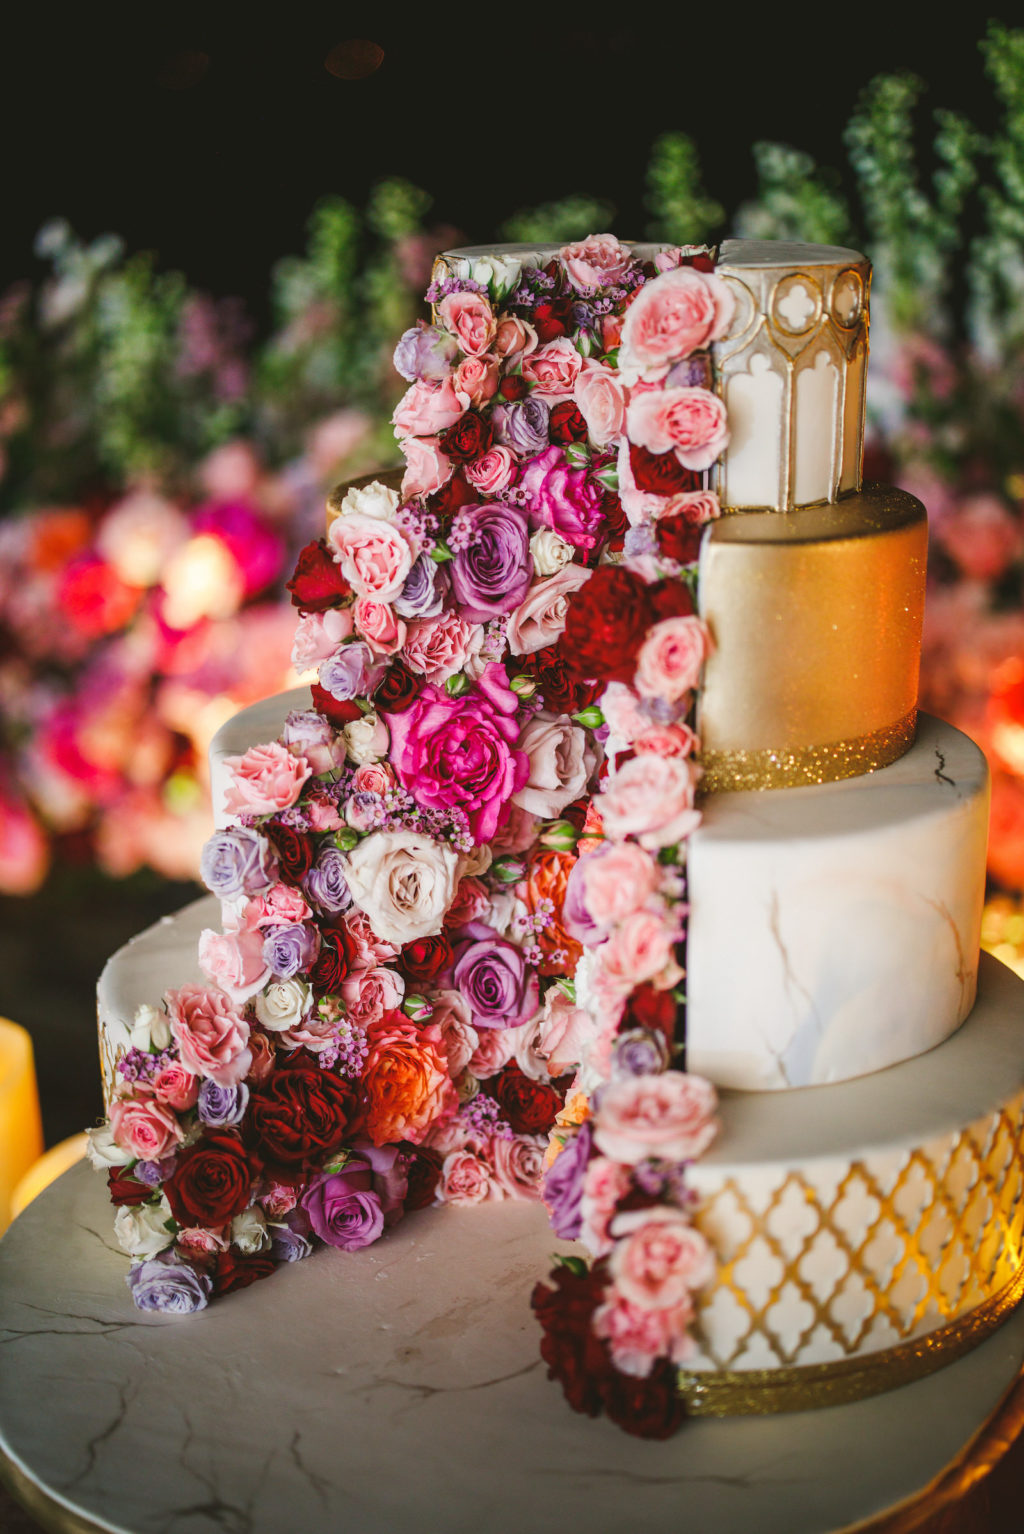 Four Tier White and Metallic Gold Fondant Luxury Wedding Cake by The Artistic Whisk featuring Colorful Fresh Flower Pink Purple and Orange Roses